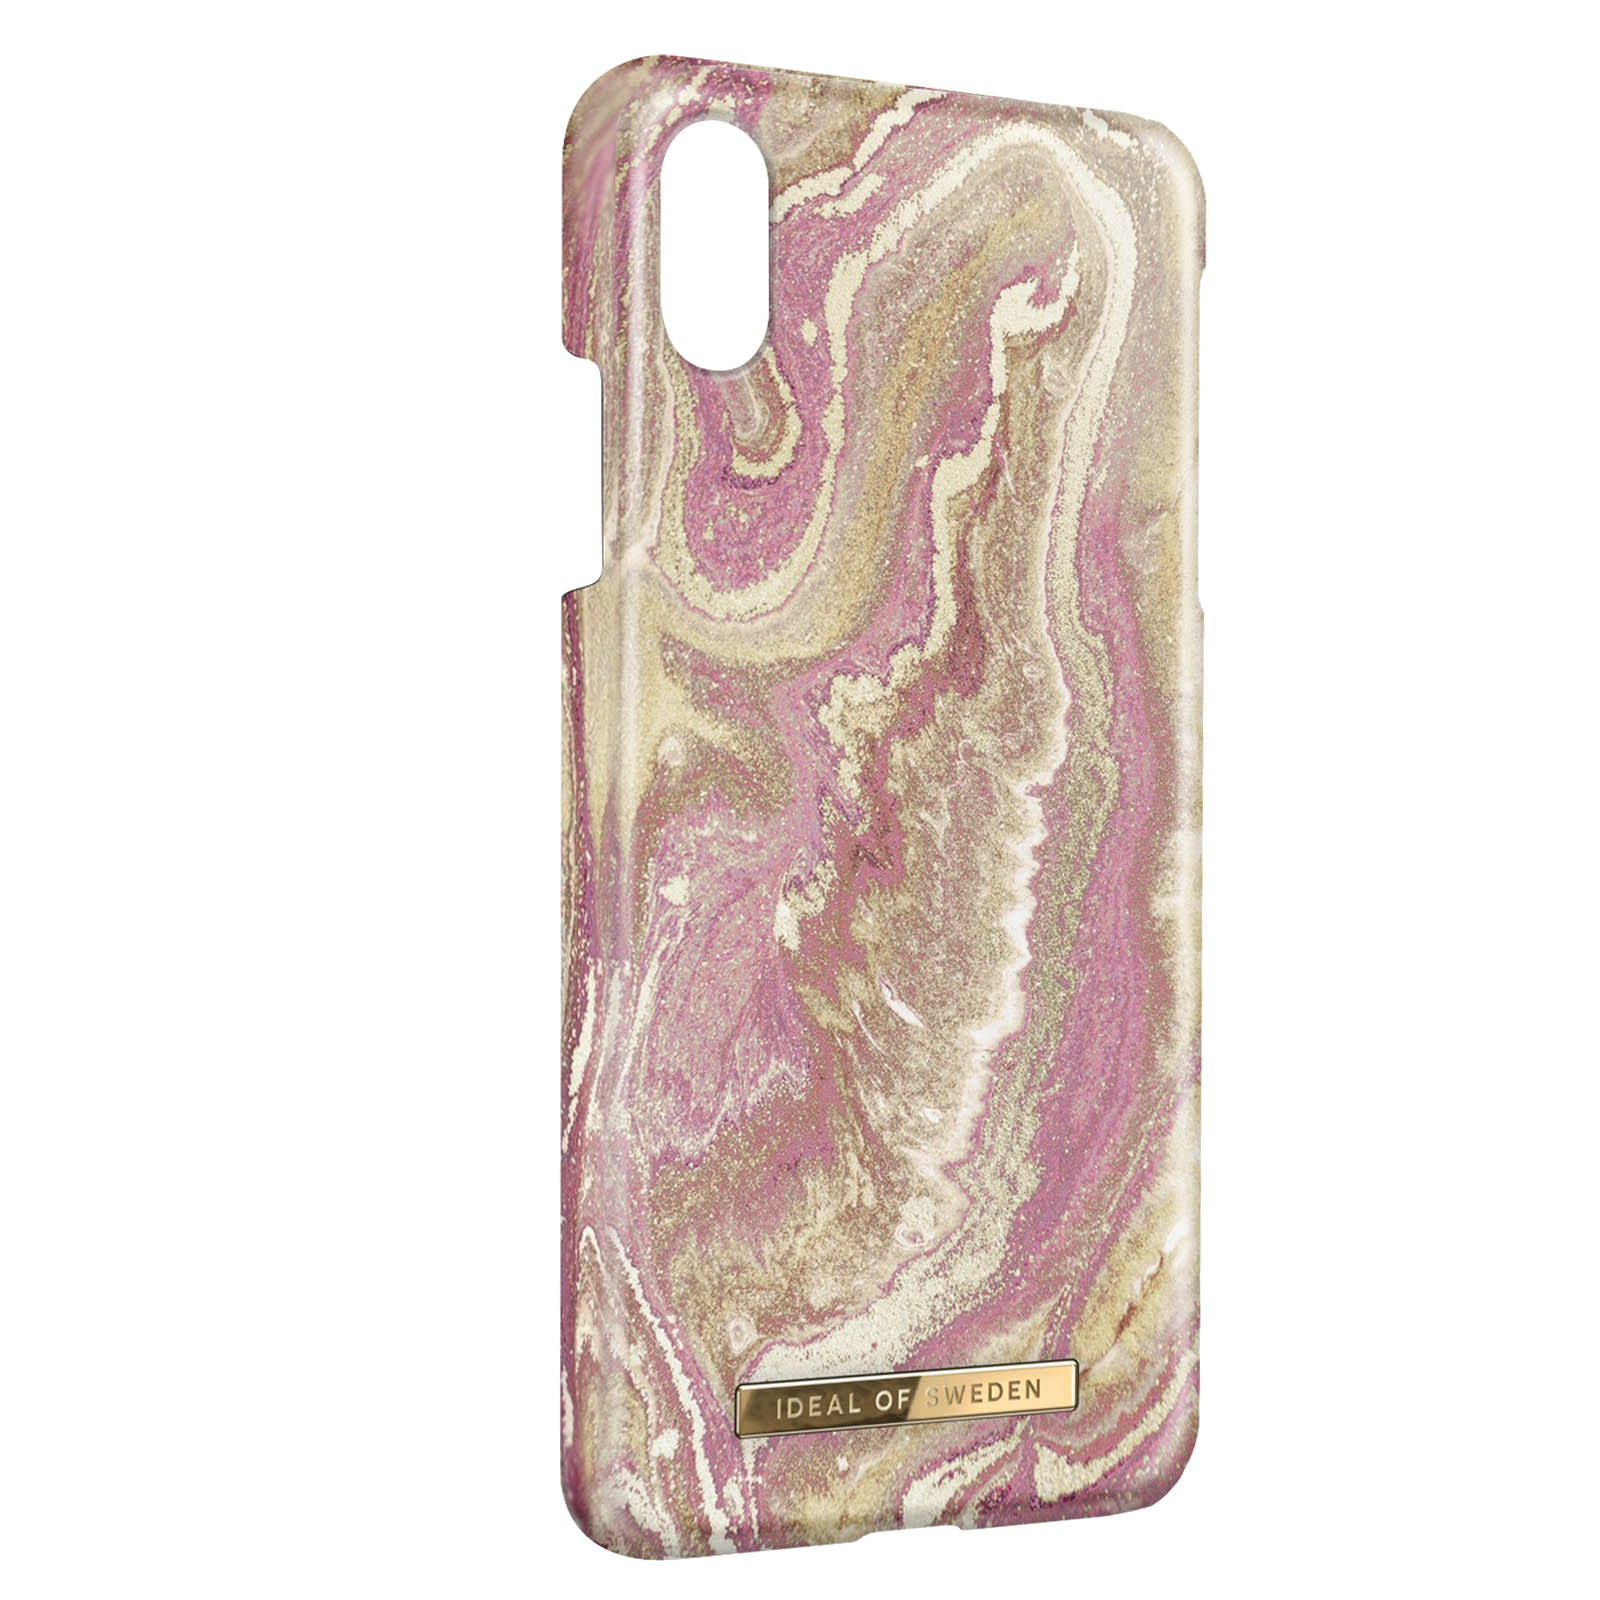 XS Marble Backcover, Apple, iPhone SWEDEN OF Golden IDEAL Rosa Max, Hülle Series, Blush